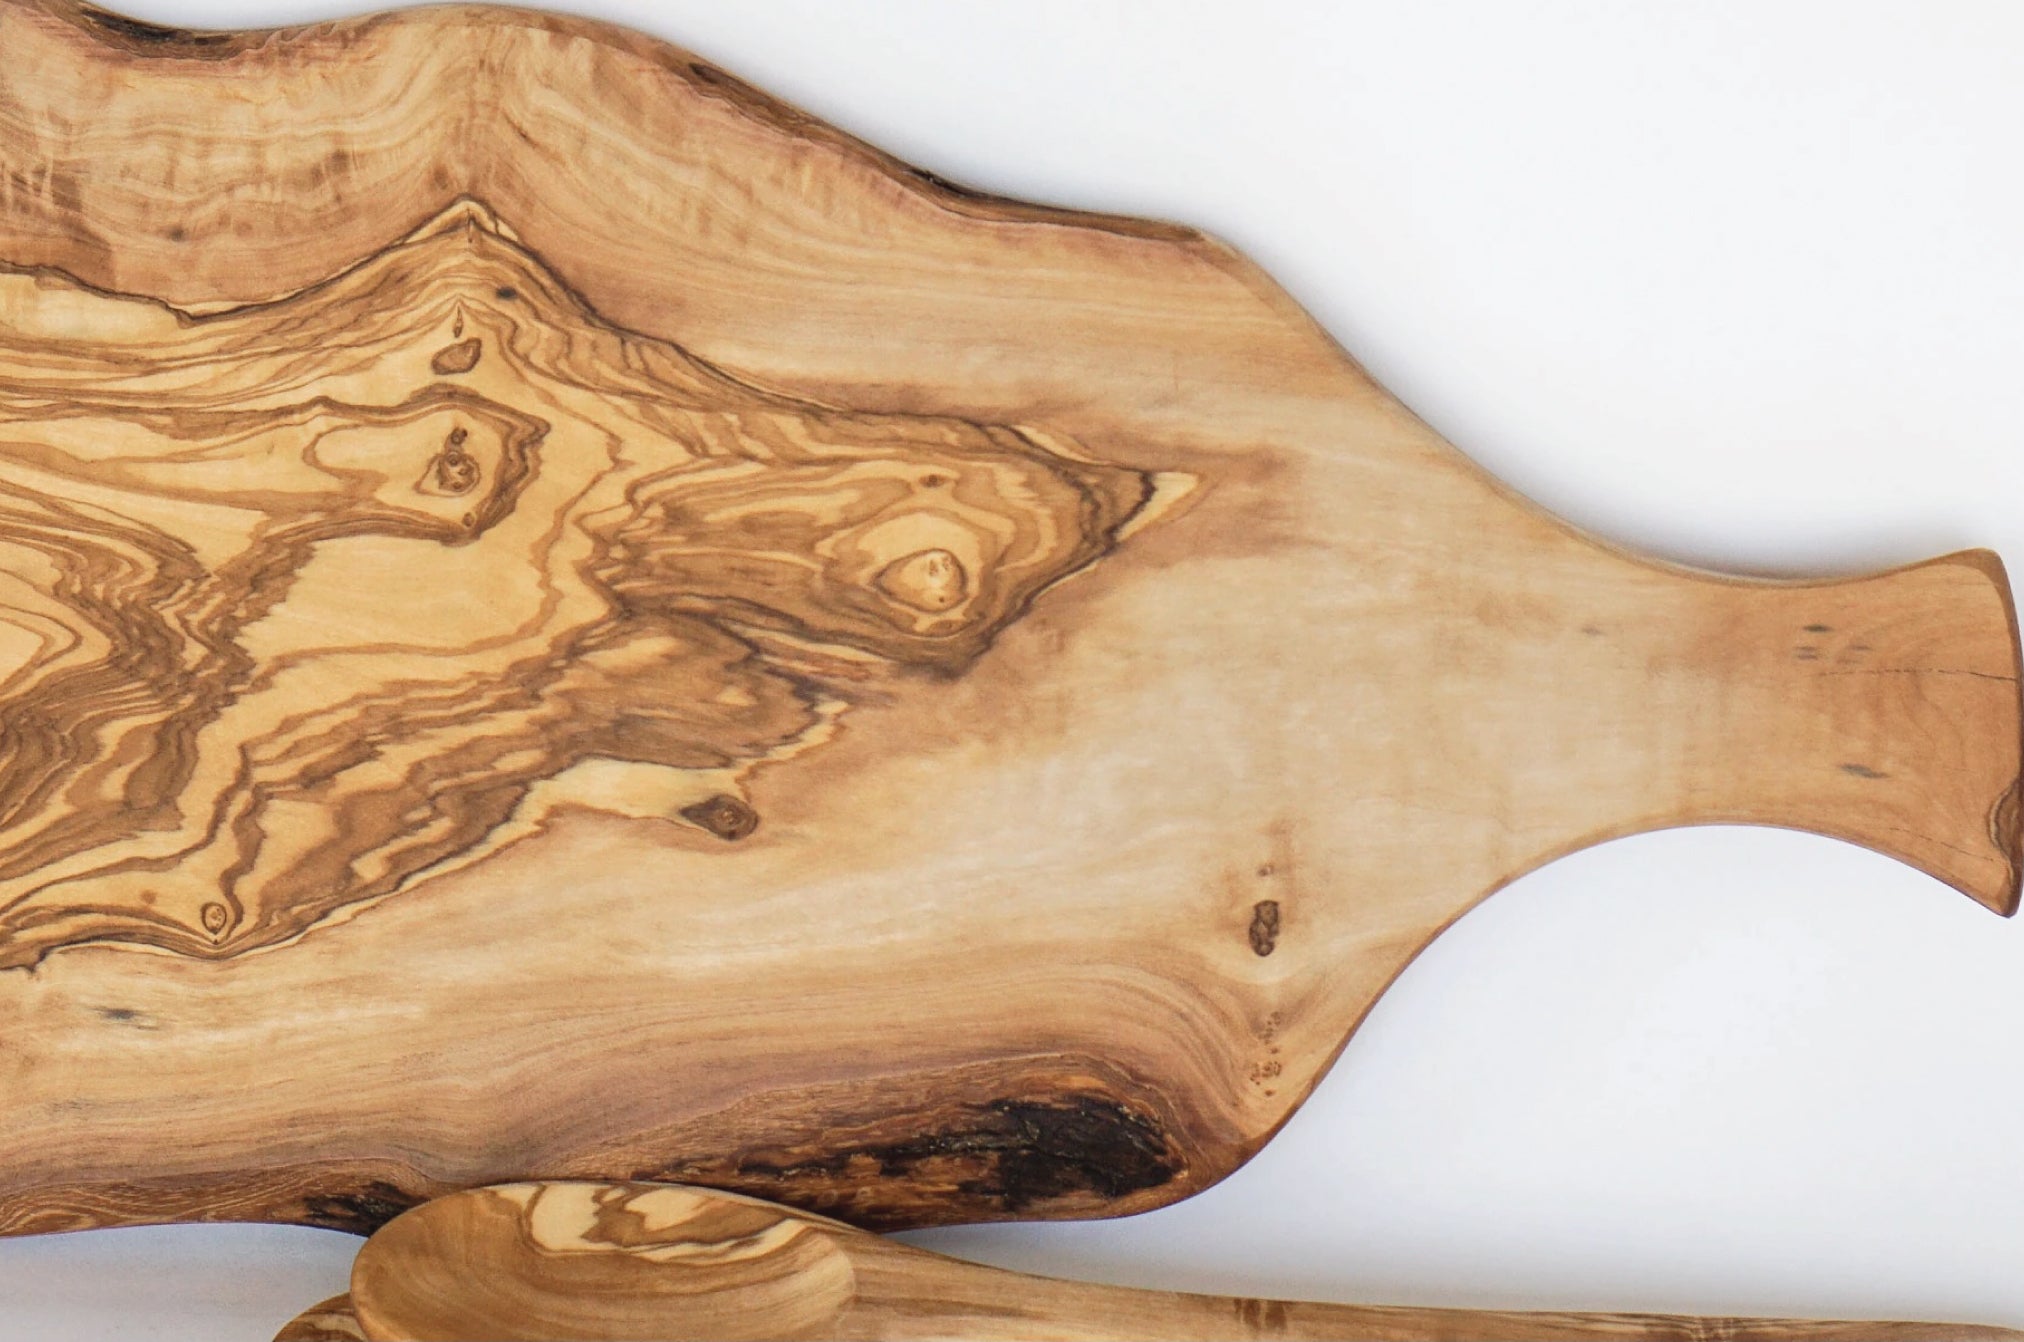 Sousse serving board by Fairkind. Luxury olive wood goods made by hand